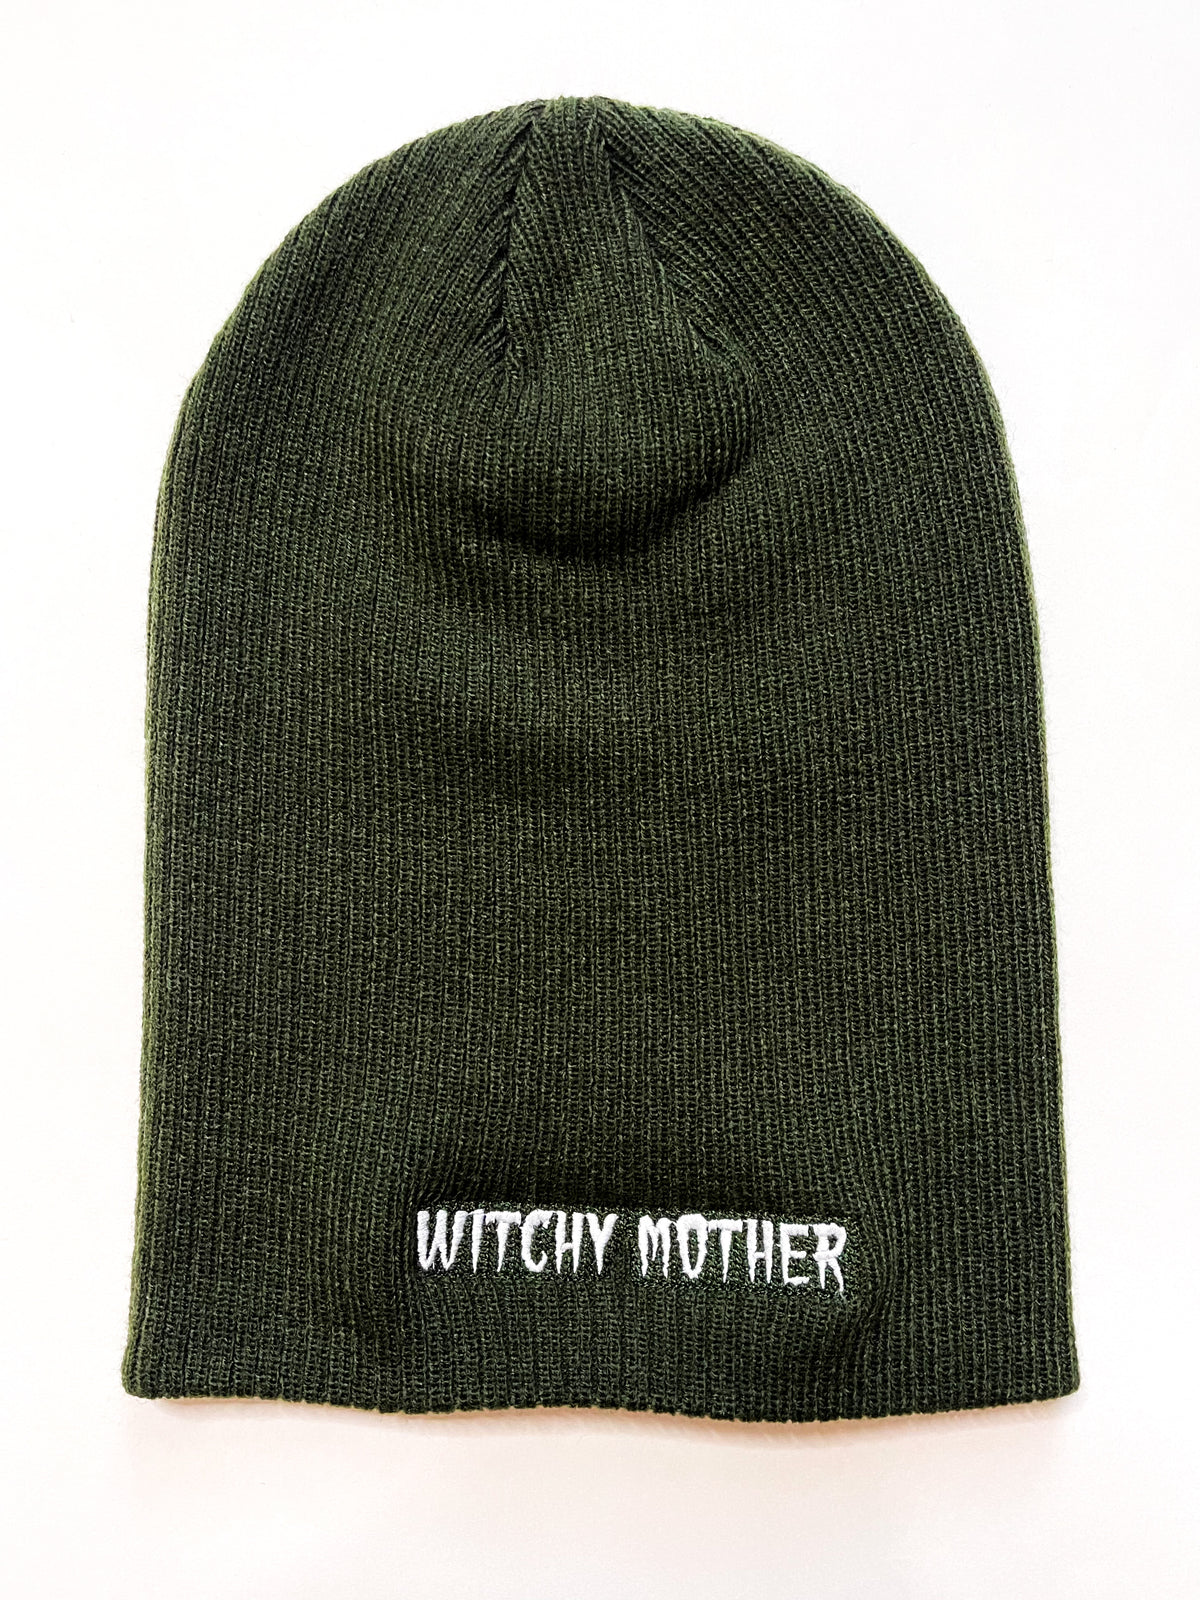 Witchy Mother Slouchy Beanie